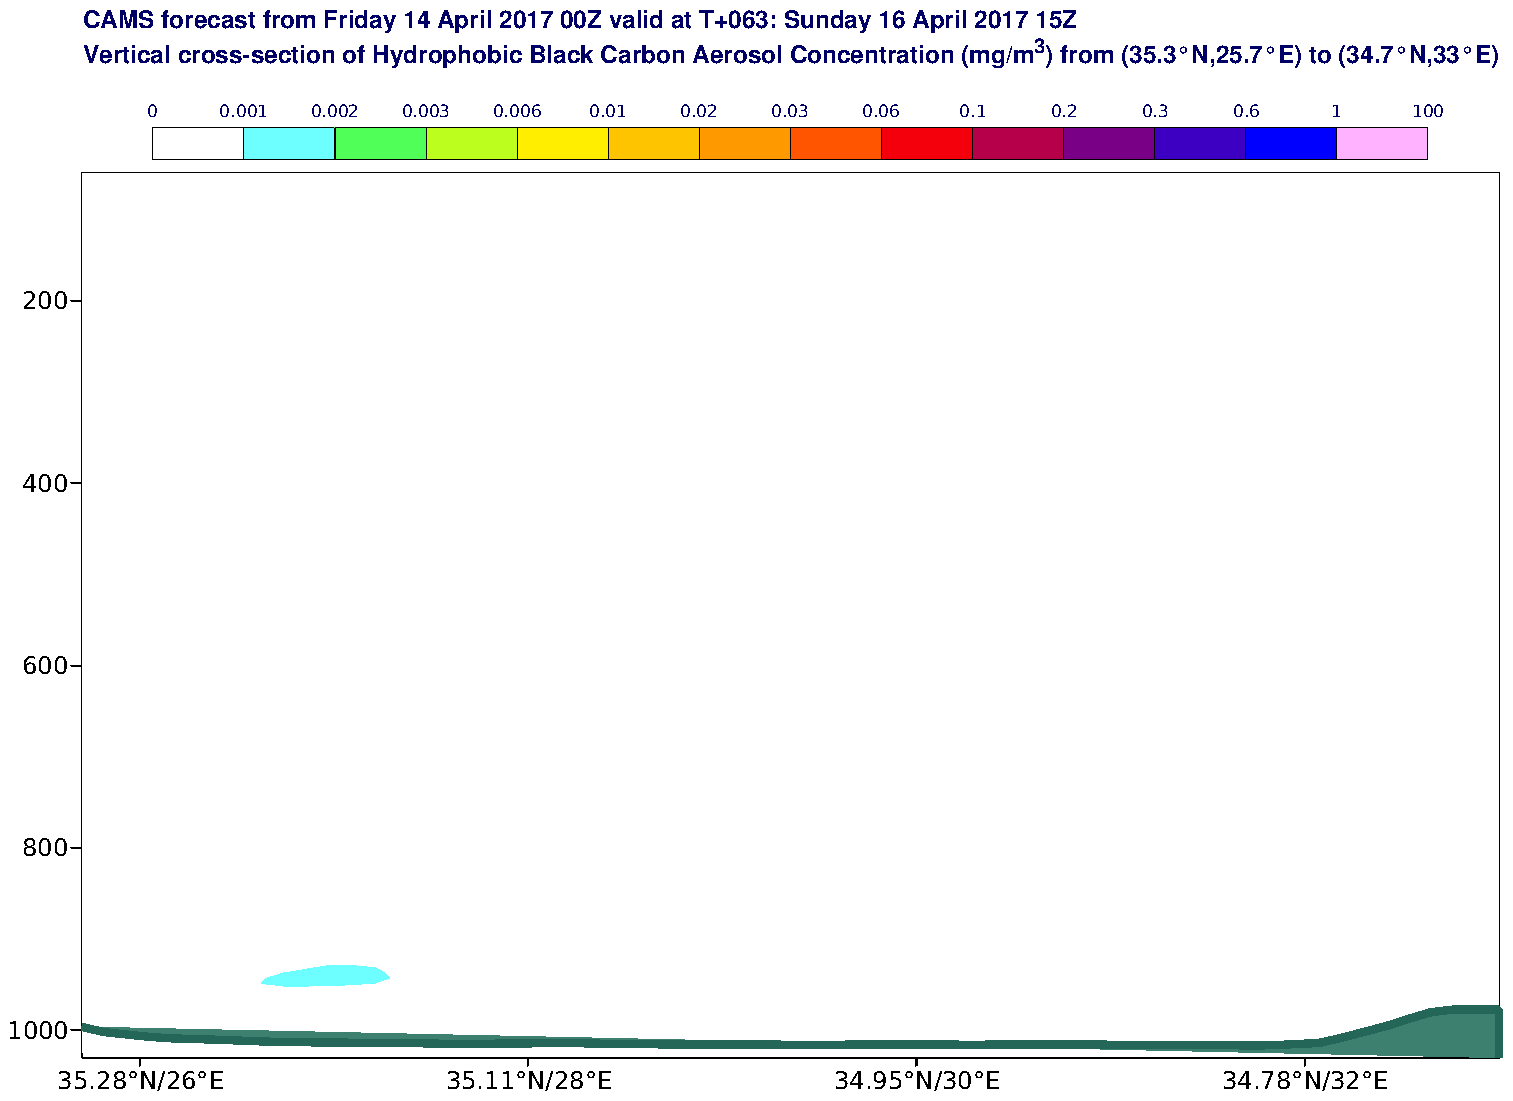 Vertical cross-section of Hydrophobic Black Carbon Aerosol Concentration (mg/m3) valid at T63 - 2017-04-16 15:00